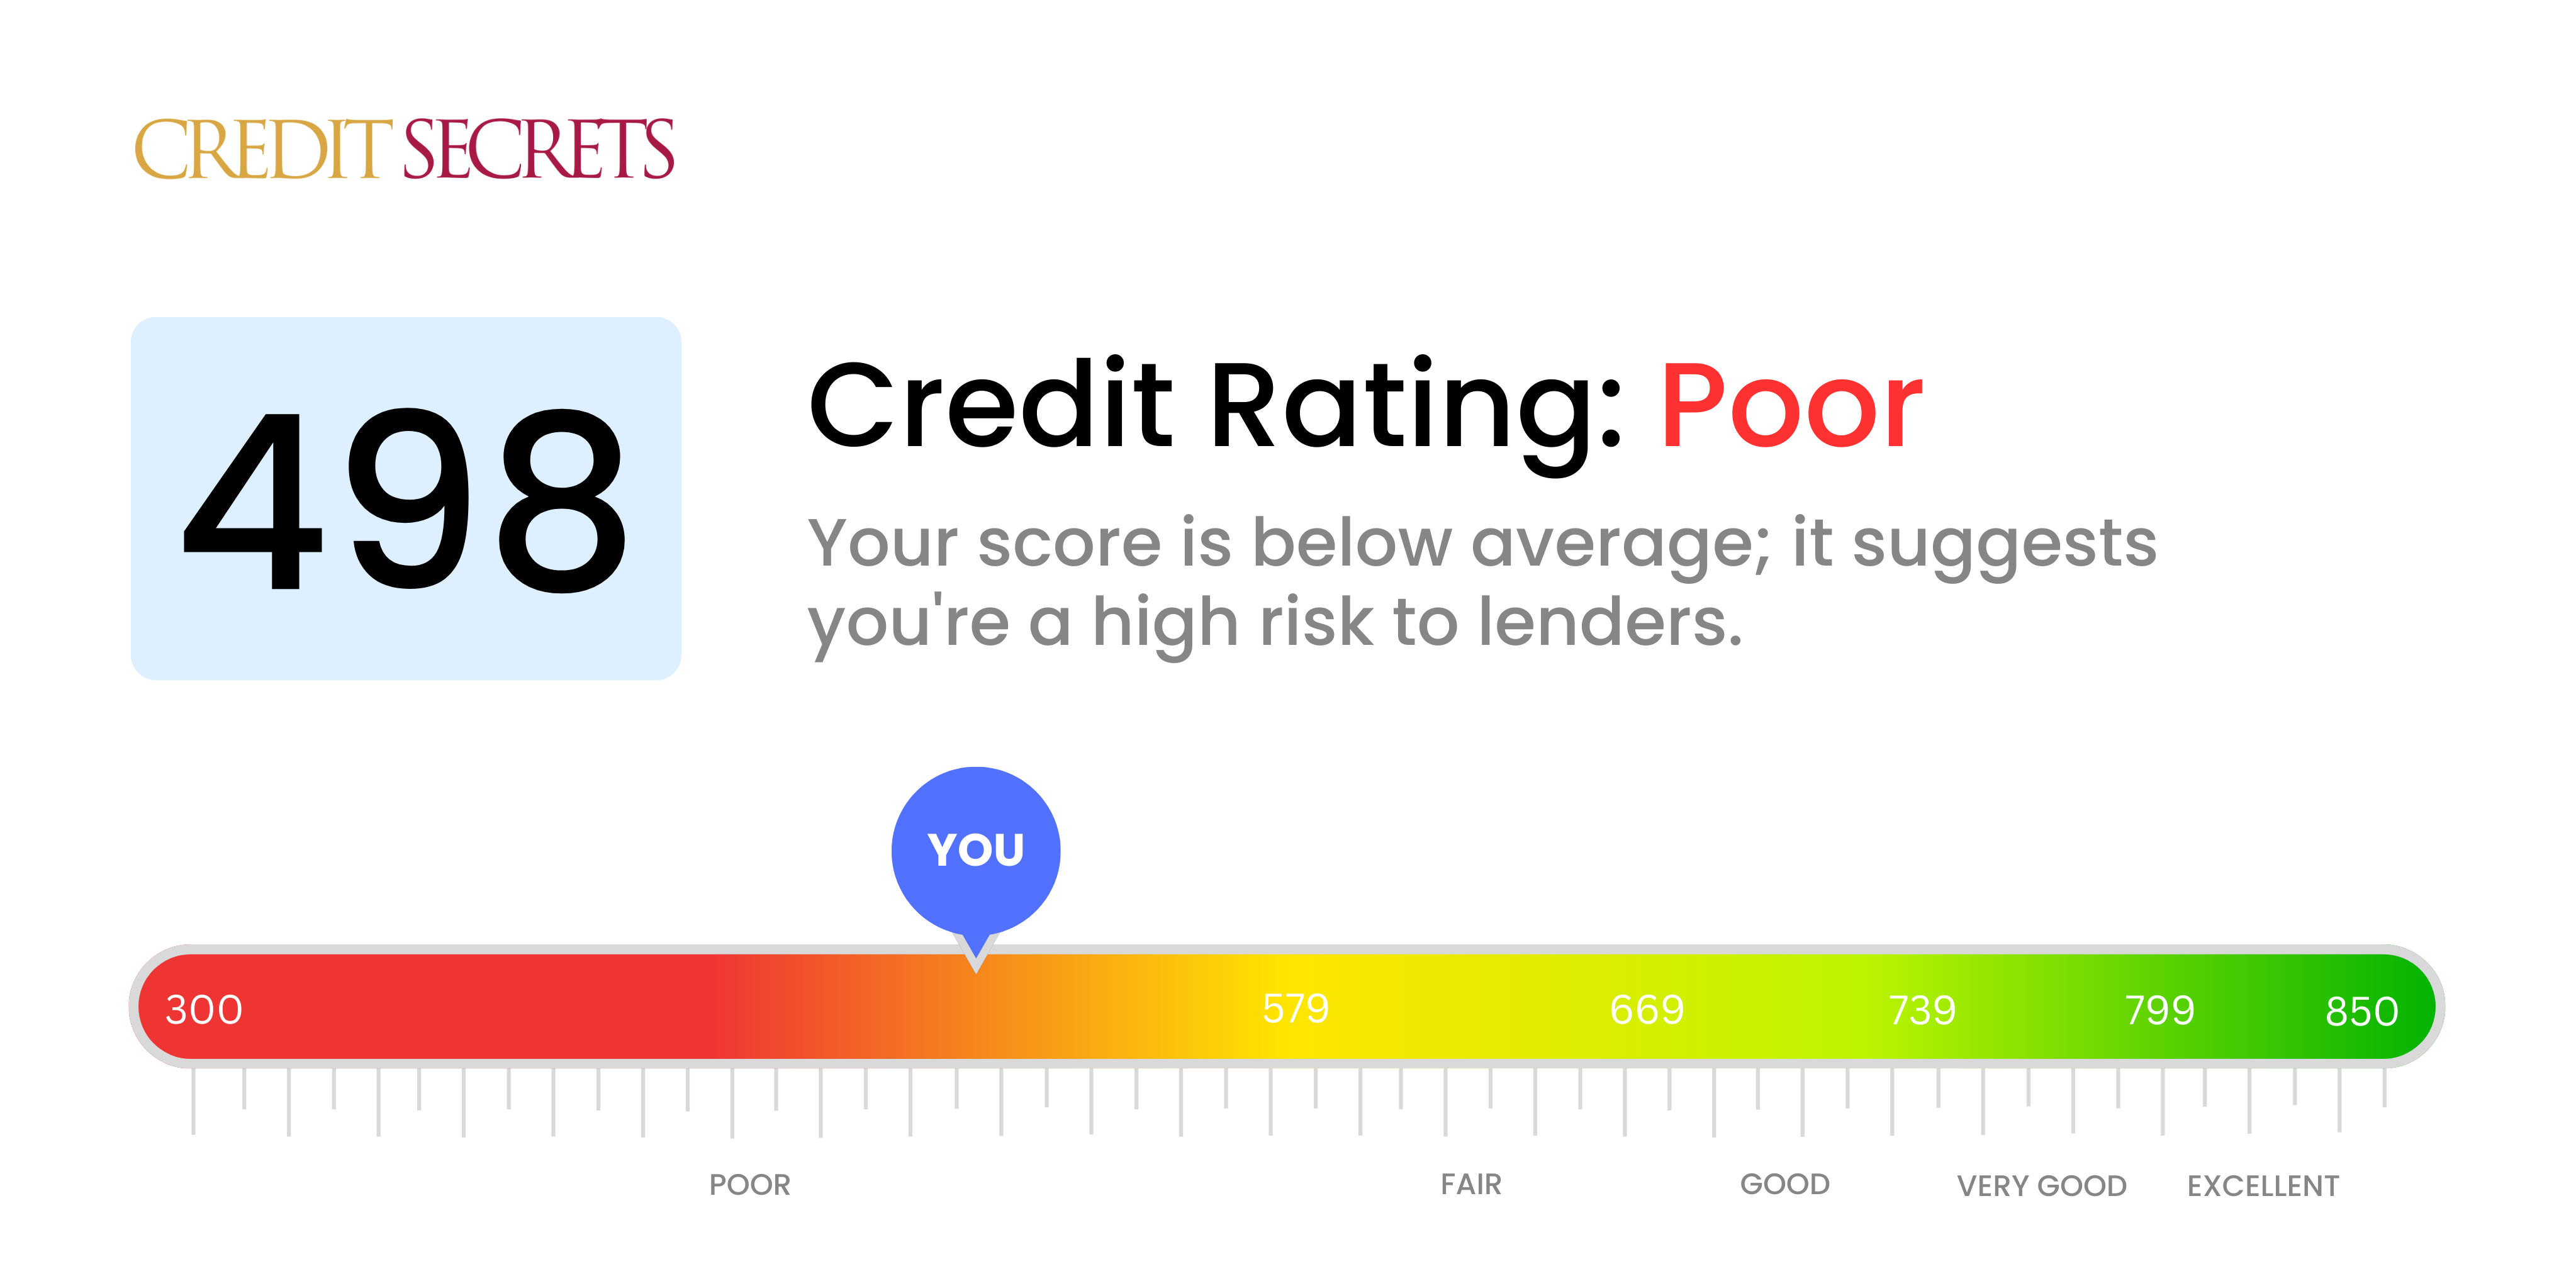 Is 498 a good credit score?